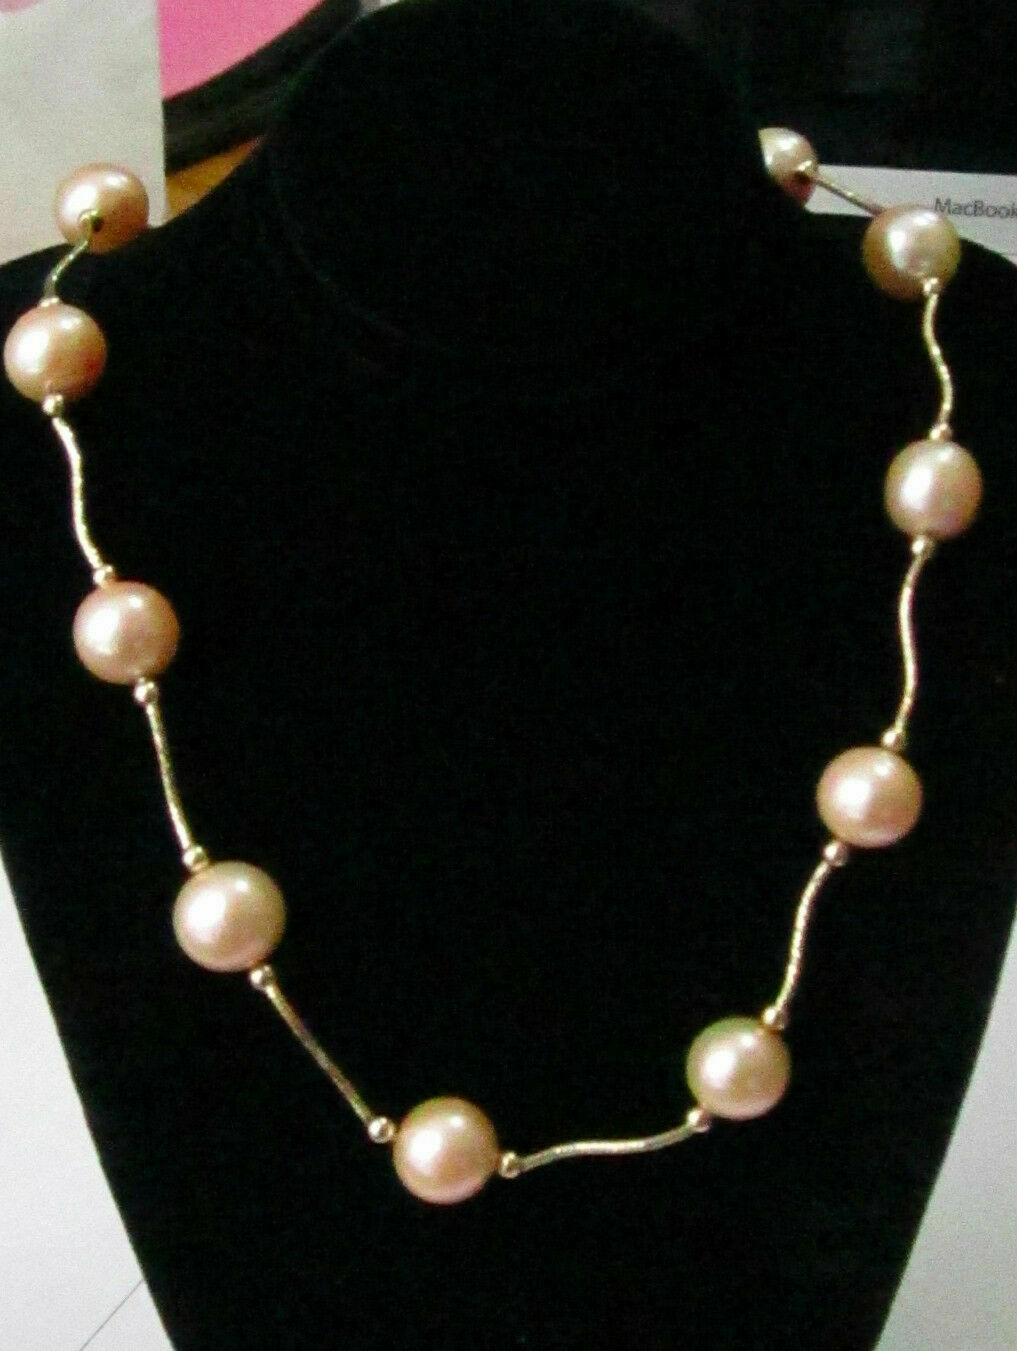 Light Gold/Peach Pearl String Necklace 11mm 18k Yellow Gold 17 Inches Long